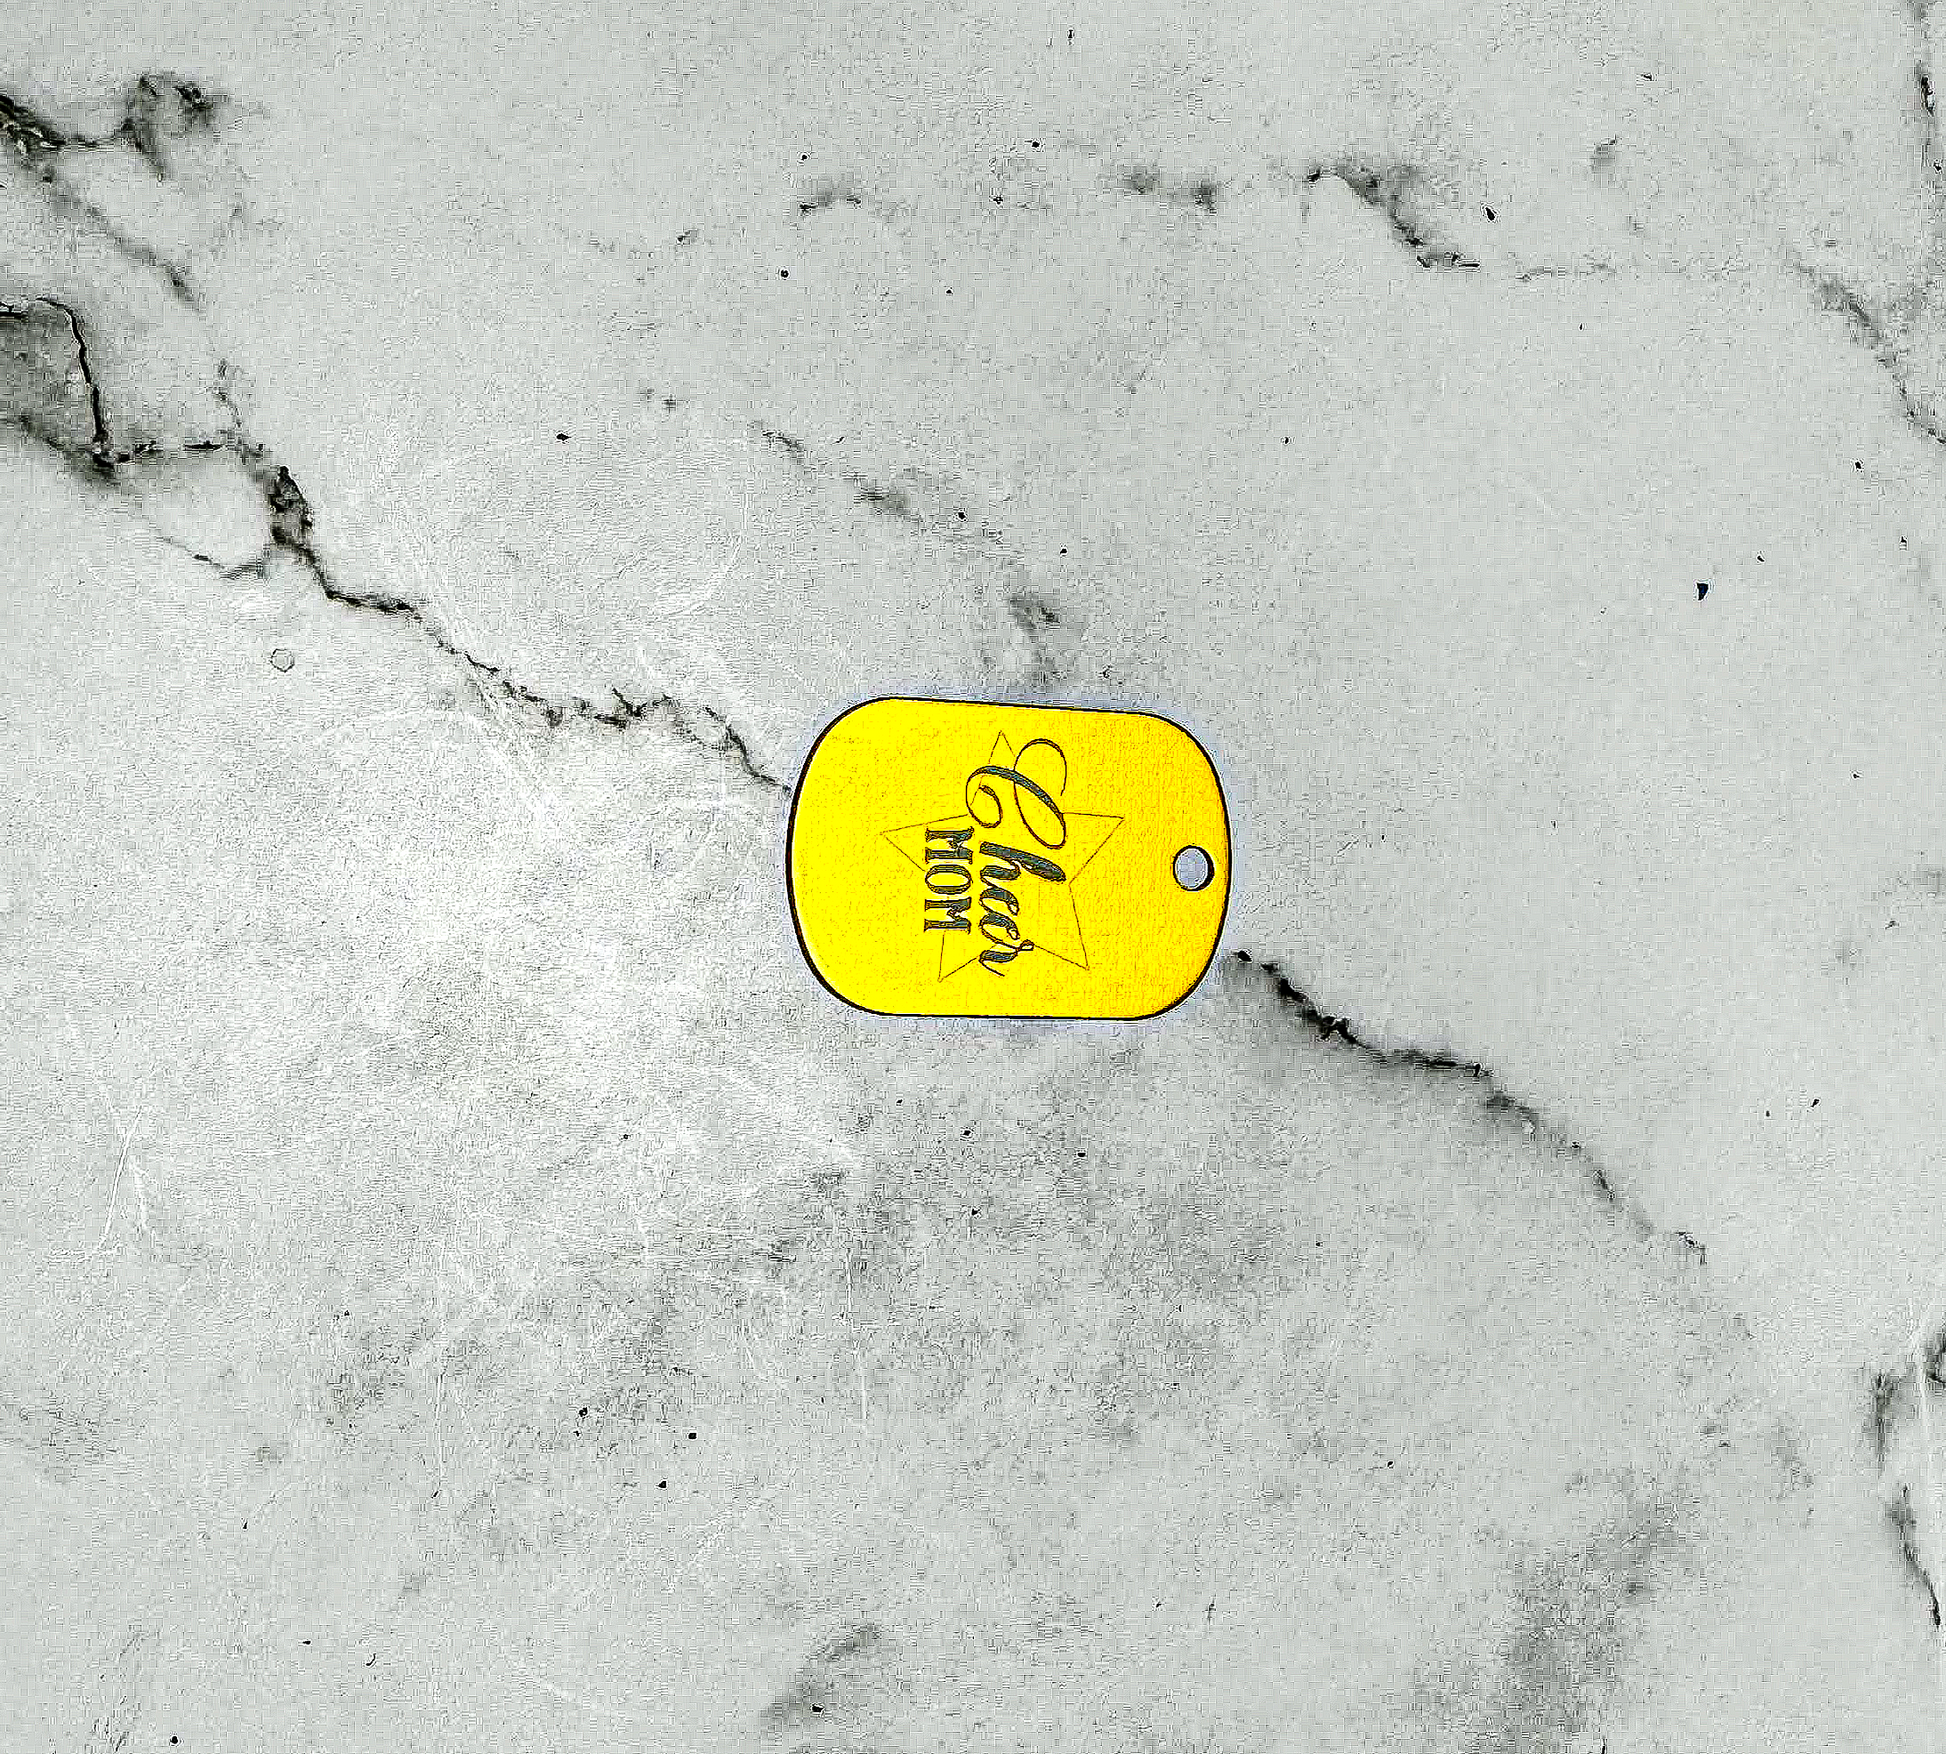 a yellow tag on a white marble surface